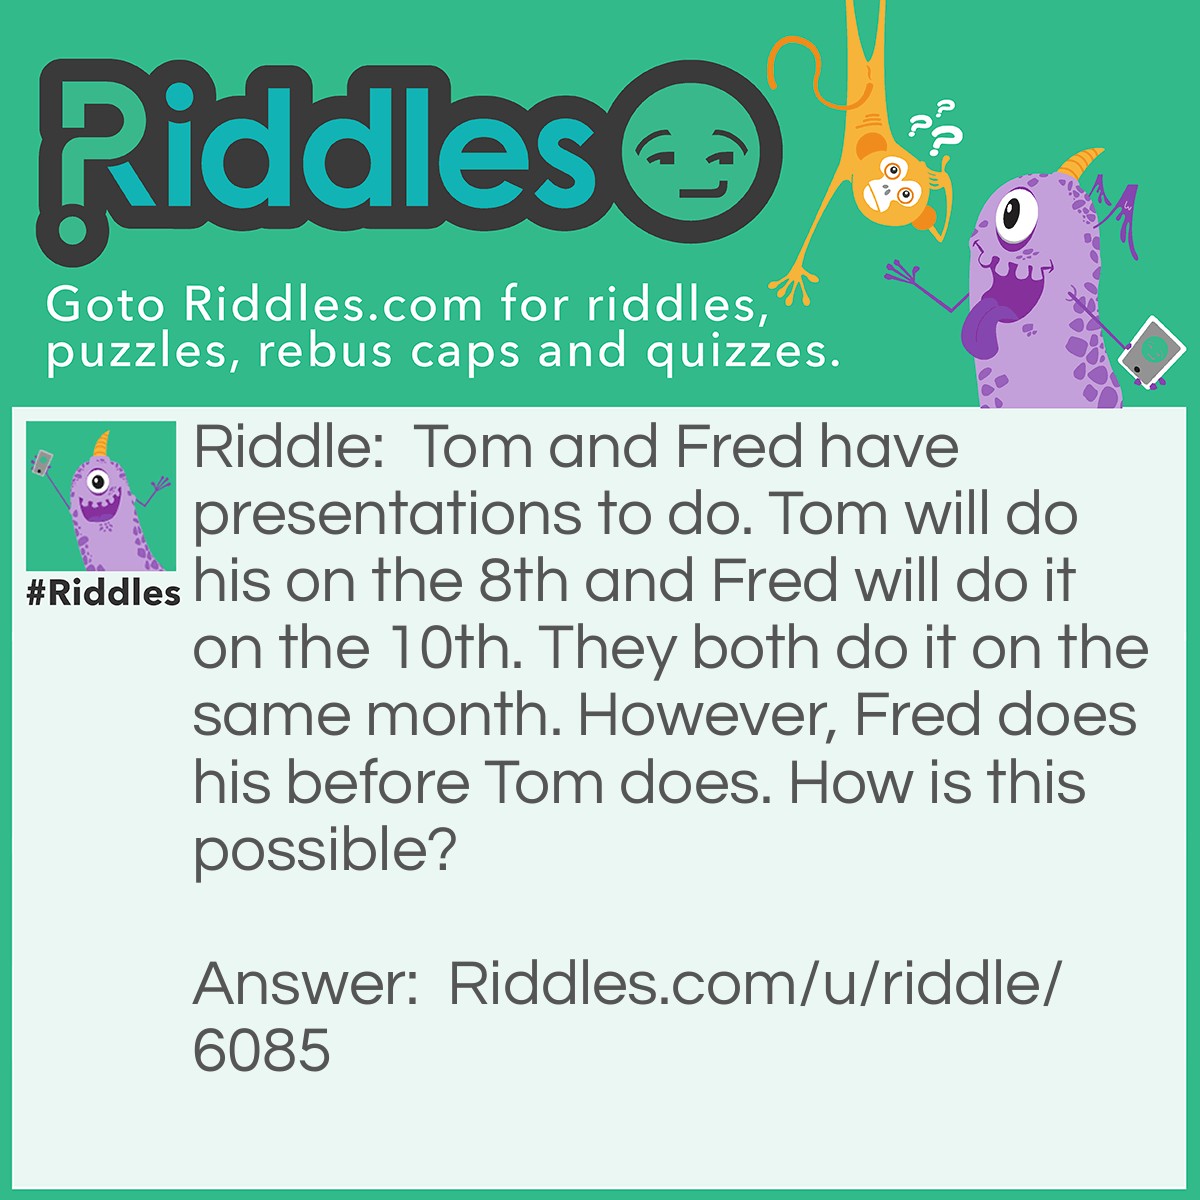 Riddle: Tom and Fred have presentations to do. Tom will do his on the 8th and Fred will do it on the 10th. They both do it on the same month. However, Fred does his before Tom does. How is this possible? Answer: Tom does his on July 8, 1994 and Fred does his on July 10th, 1995.